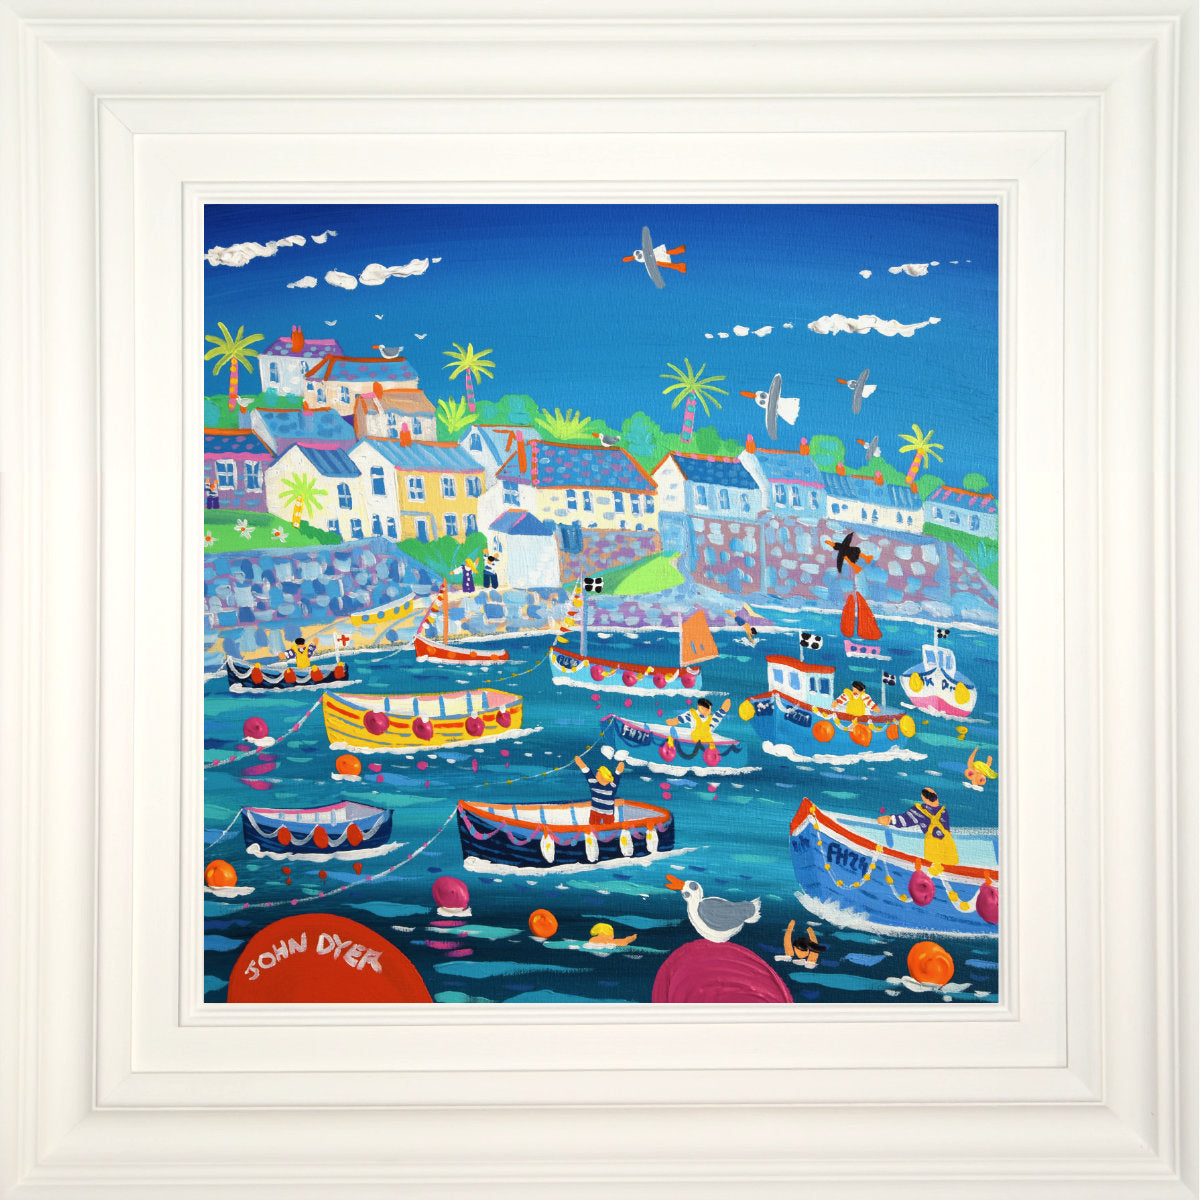 &#39;High Tide in the Harbour, Coverack&#39;, 18x18 inches acrylic on canvas. Cornish Coastal Art Painting by British Artist John Dyer.